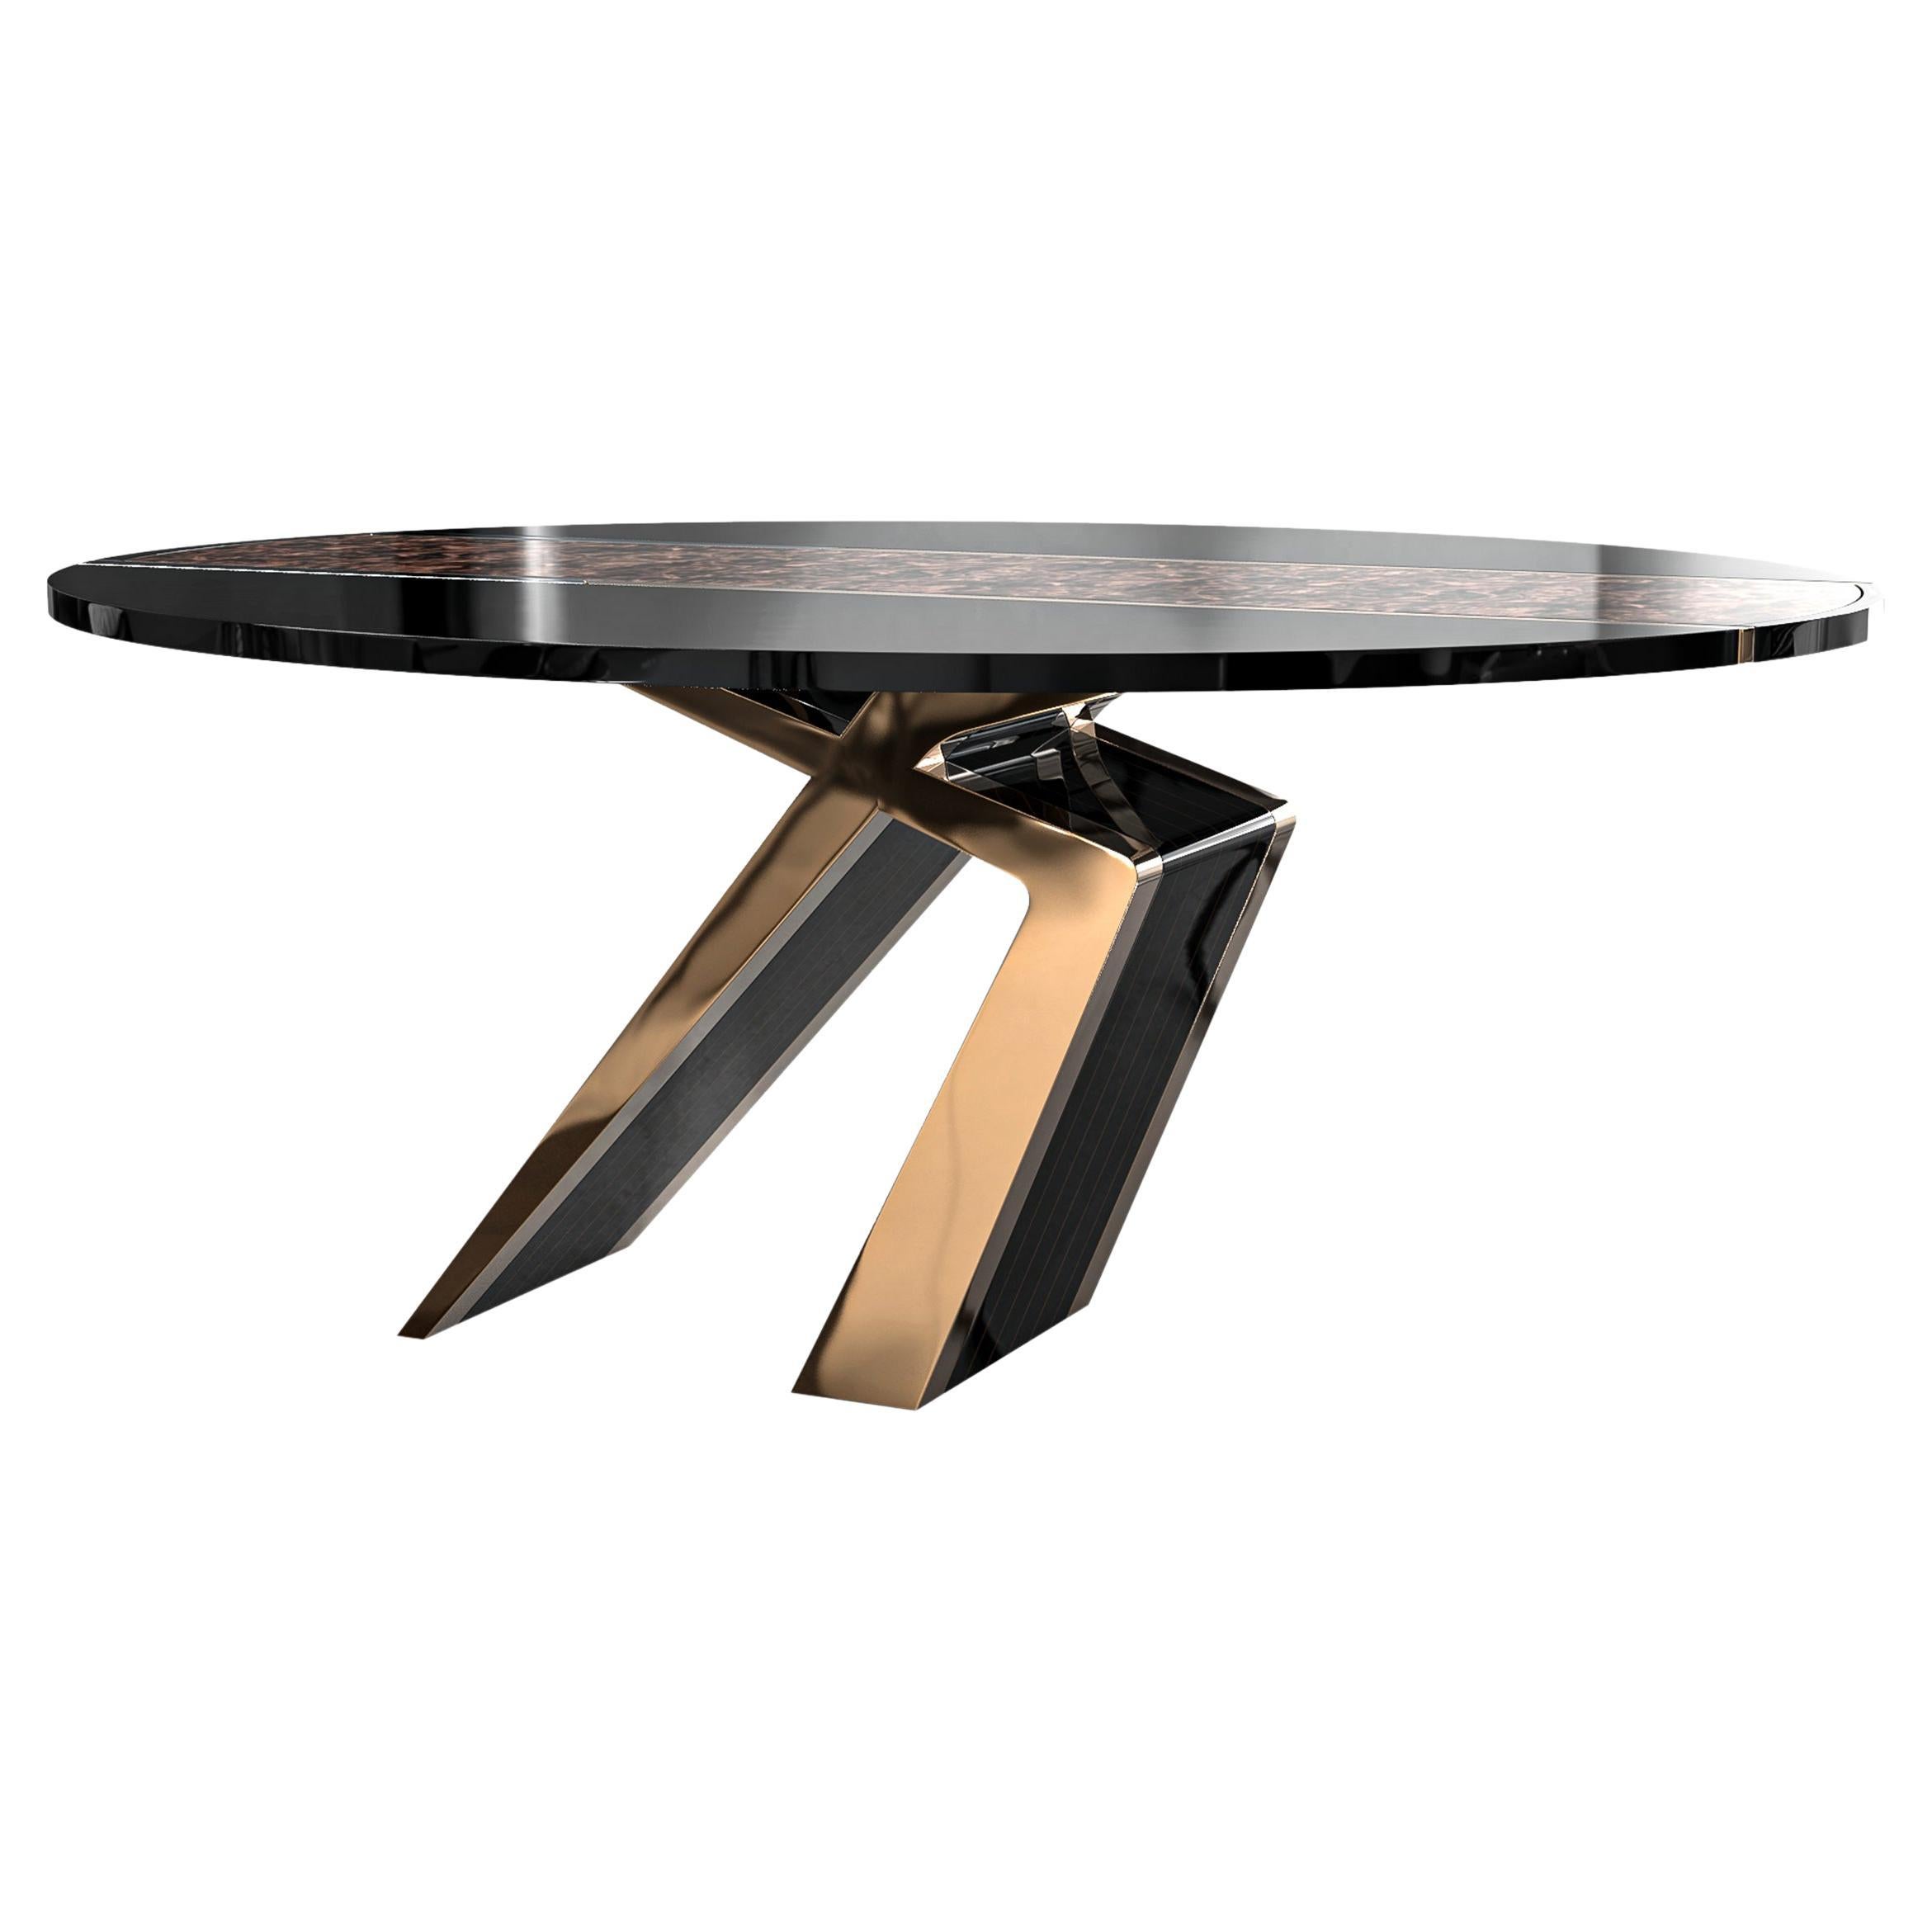 "Melagrana" Table with Bronze, Stainless Steel and Burl Walnut, Istanbul